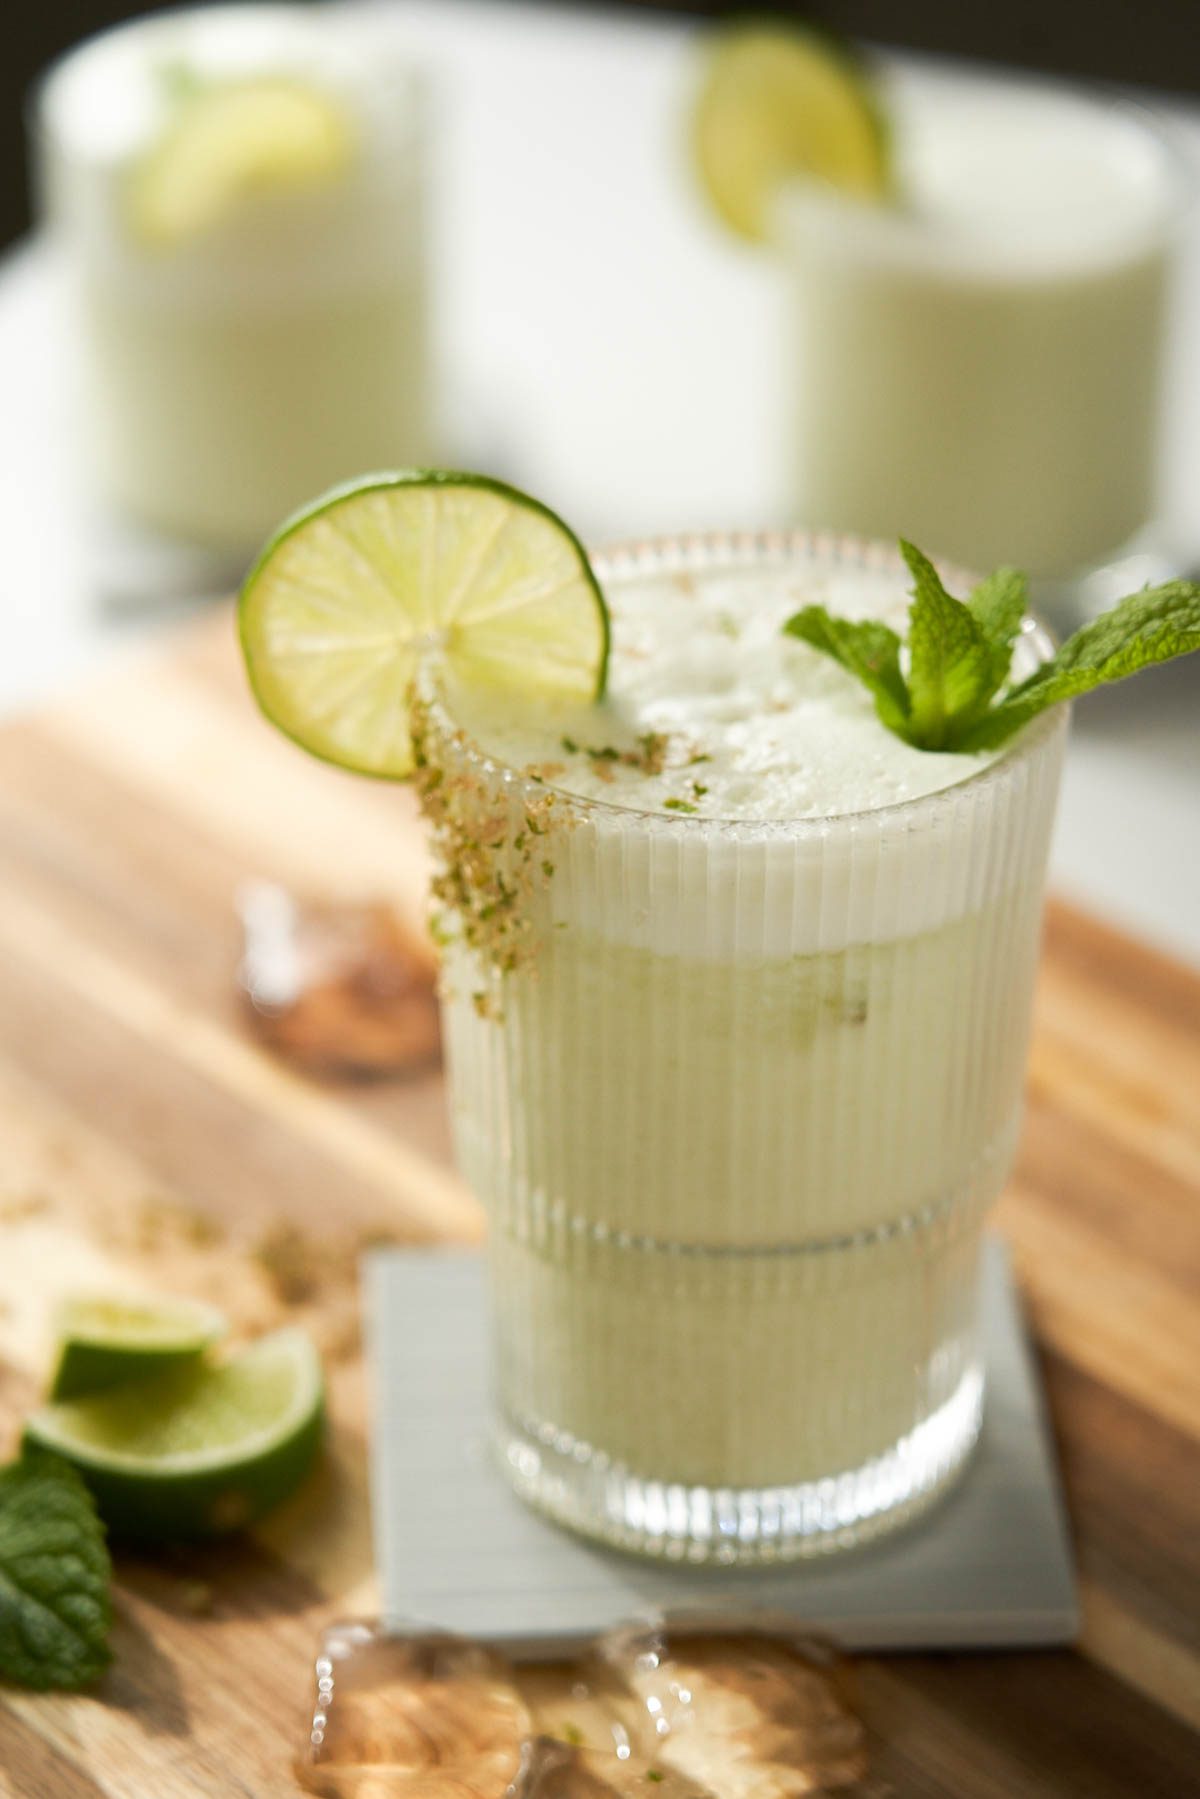 Brazilian lemonade garnished with lime and mint.